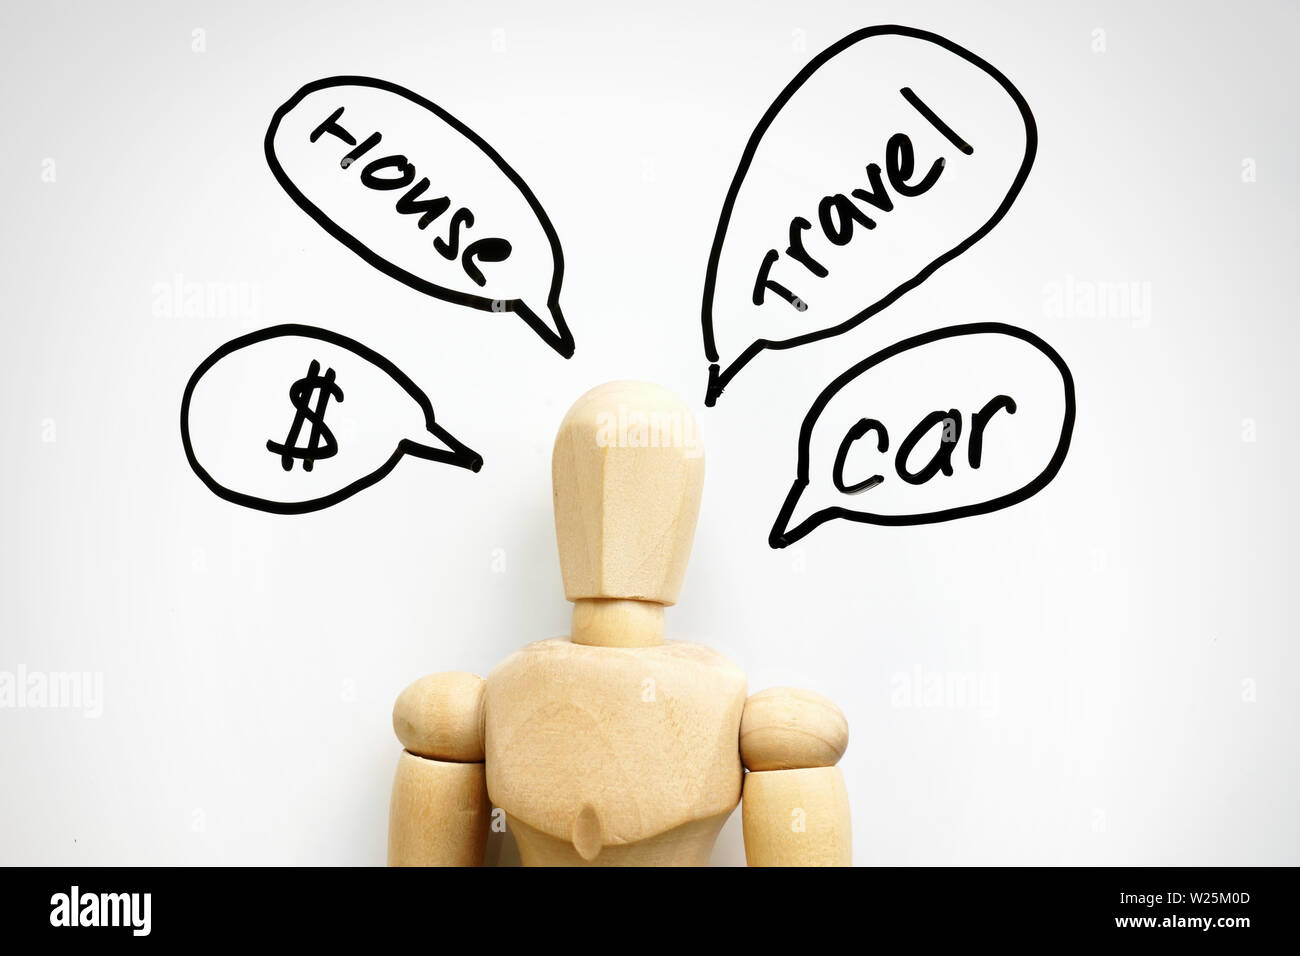 Wooden figurine and such wishes as house, money, travel and car. Stock Photo